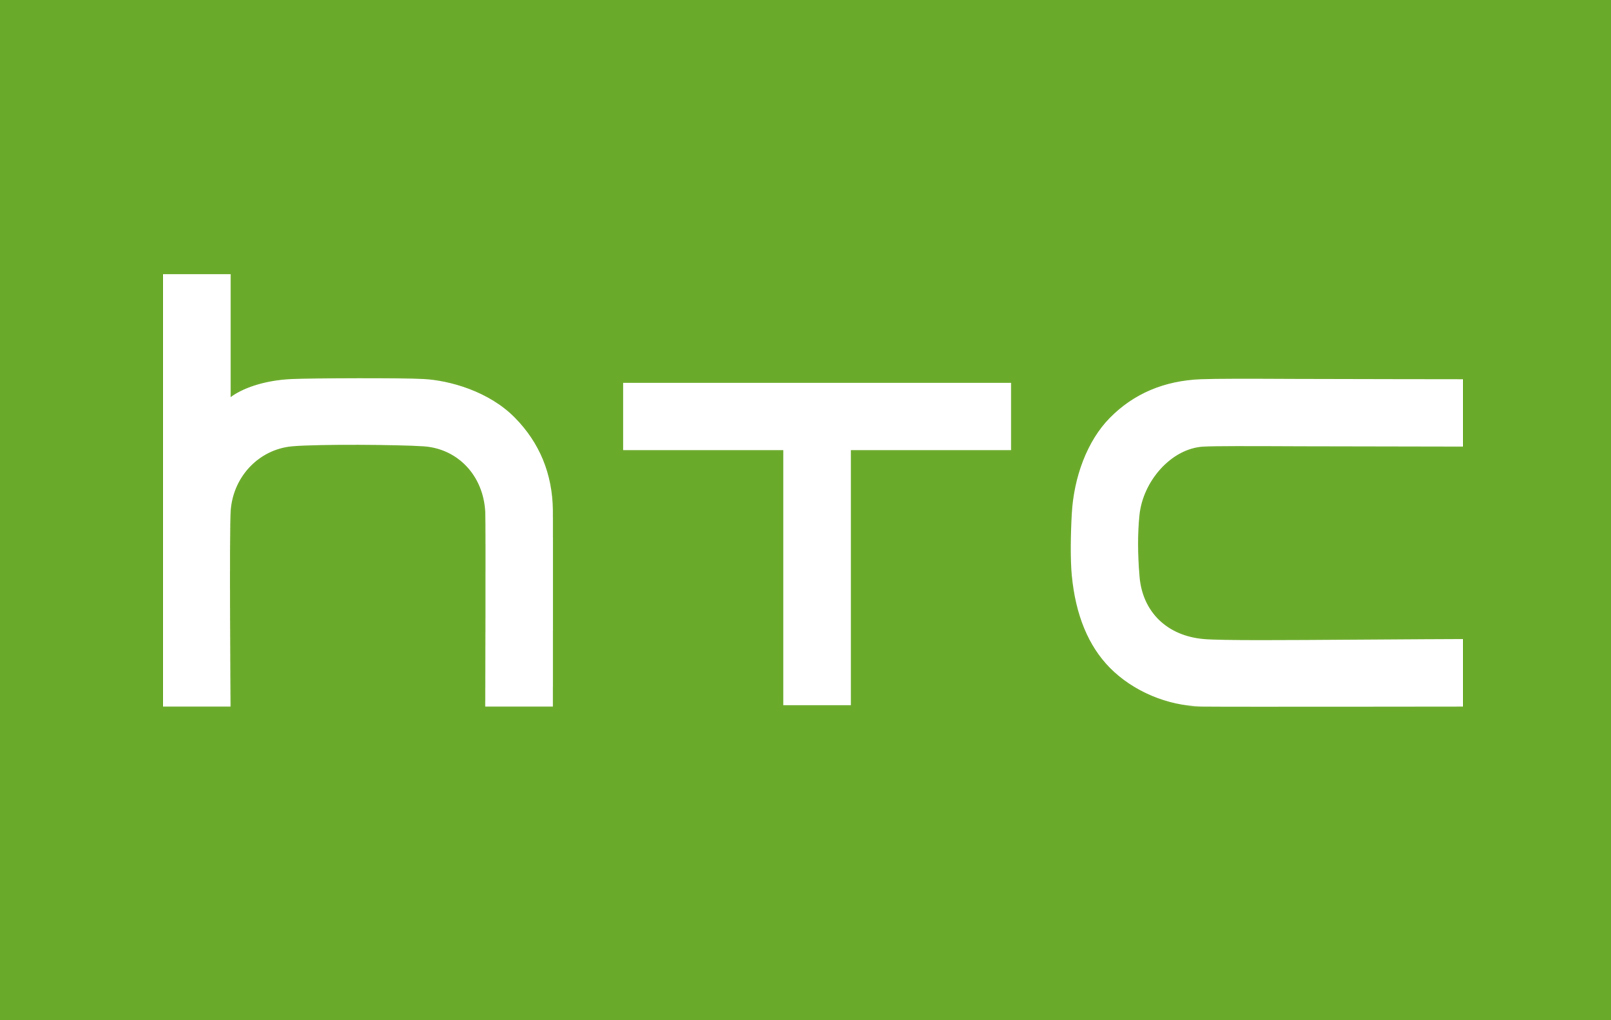 Next HTC flagship might not make it to MWC 2018